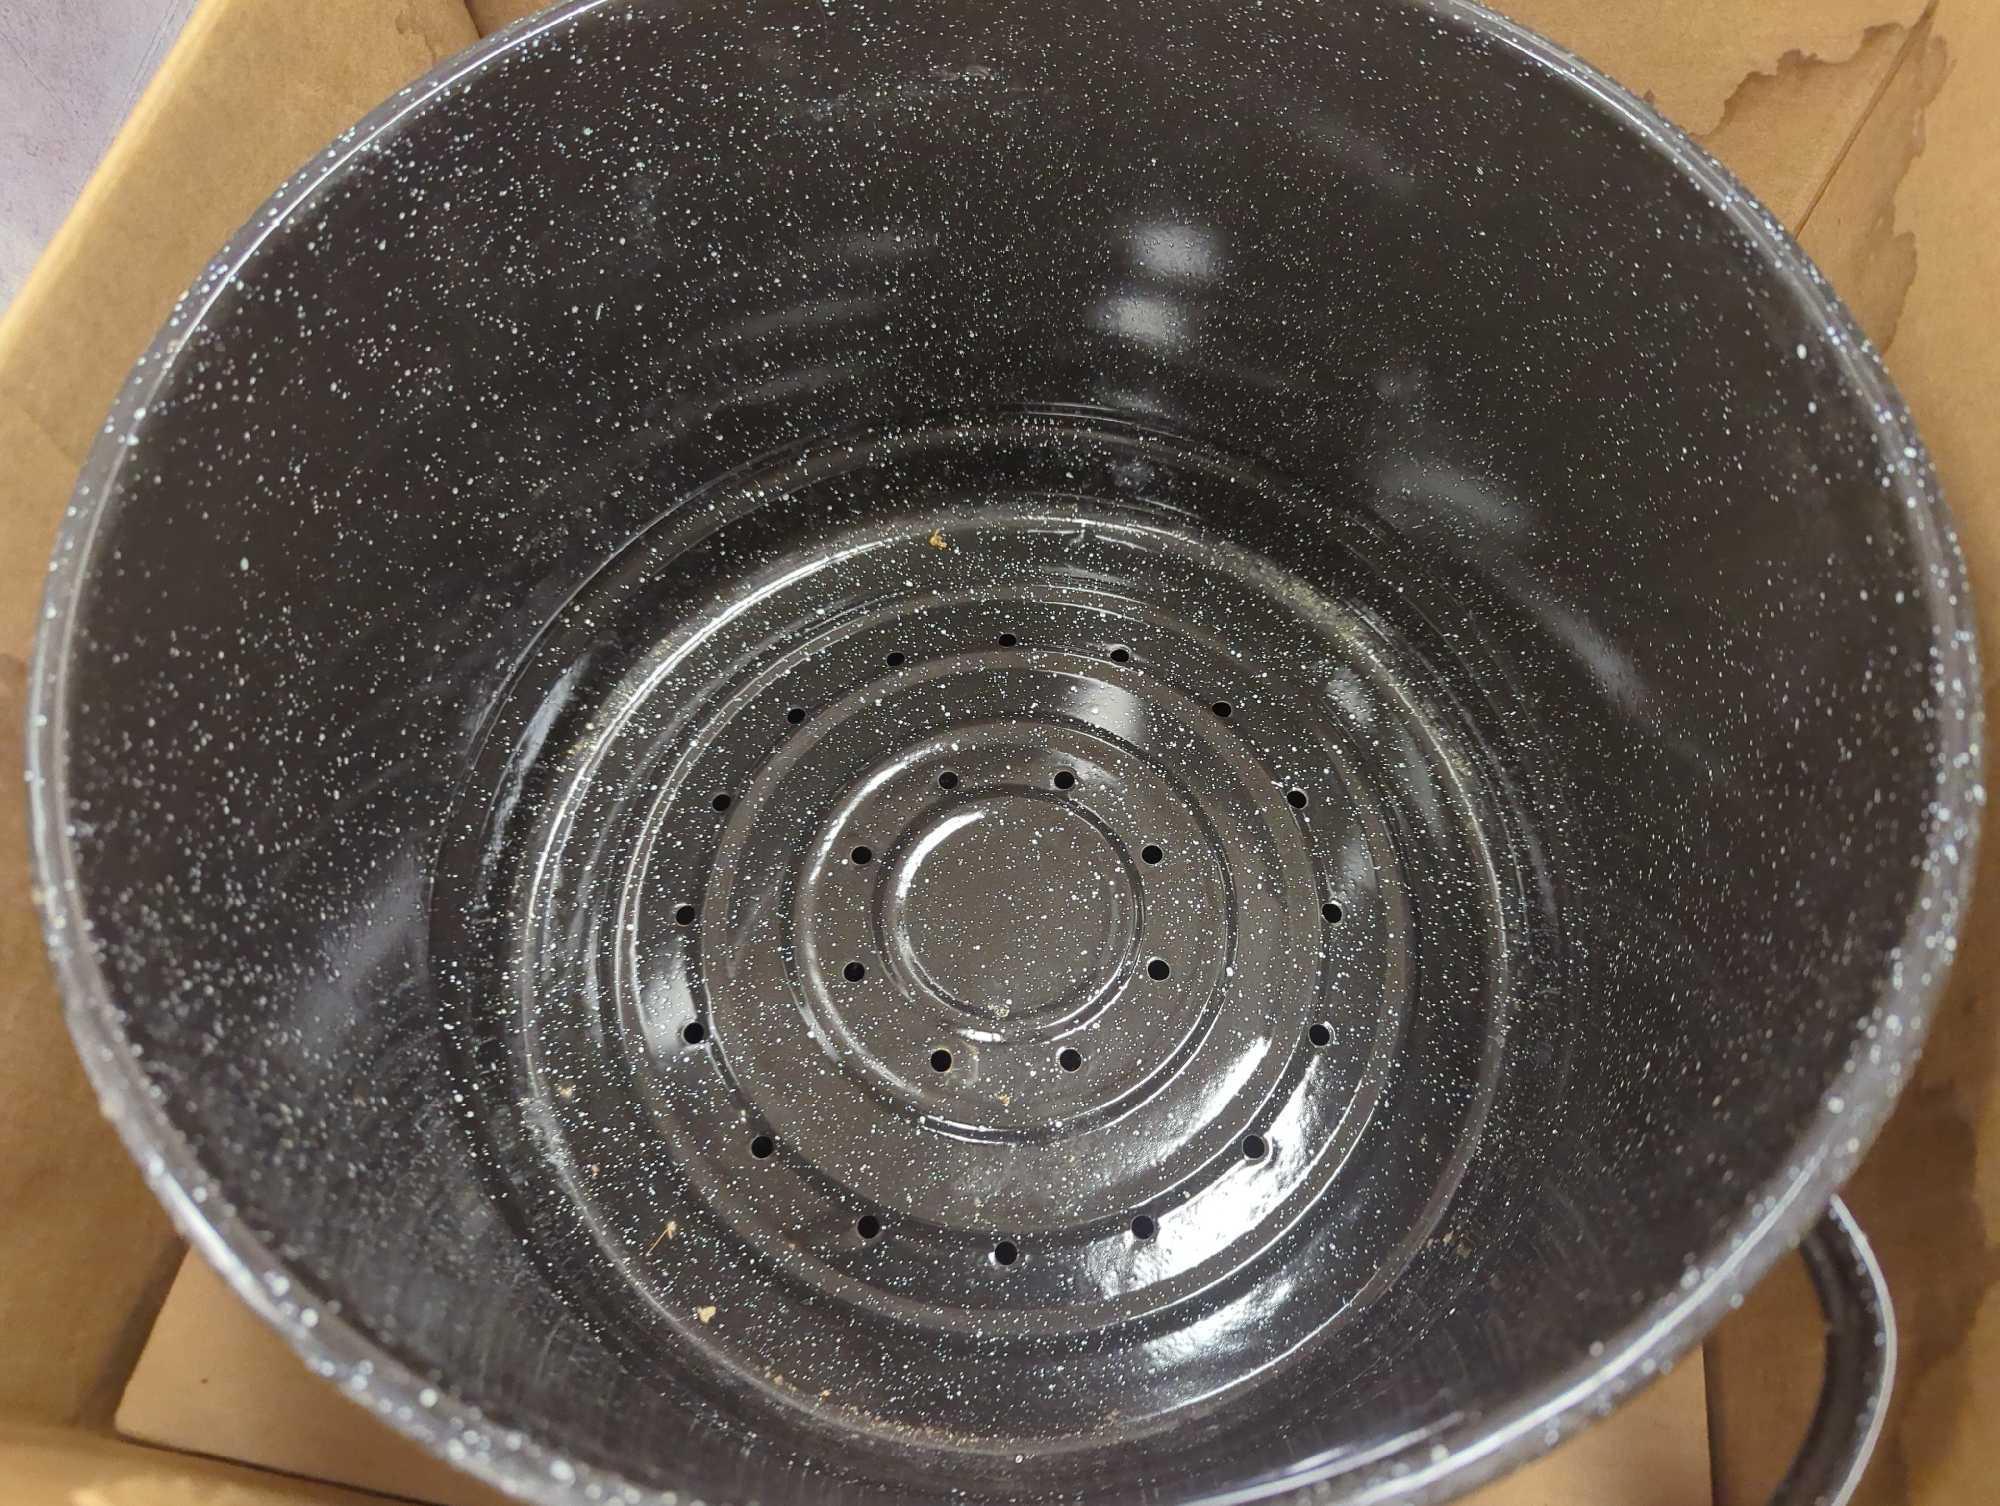 Lot of Assorted Items Including Graniteware Clam Steamer and Wire Tray Holders, What You See in the